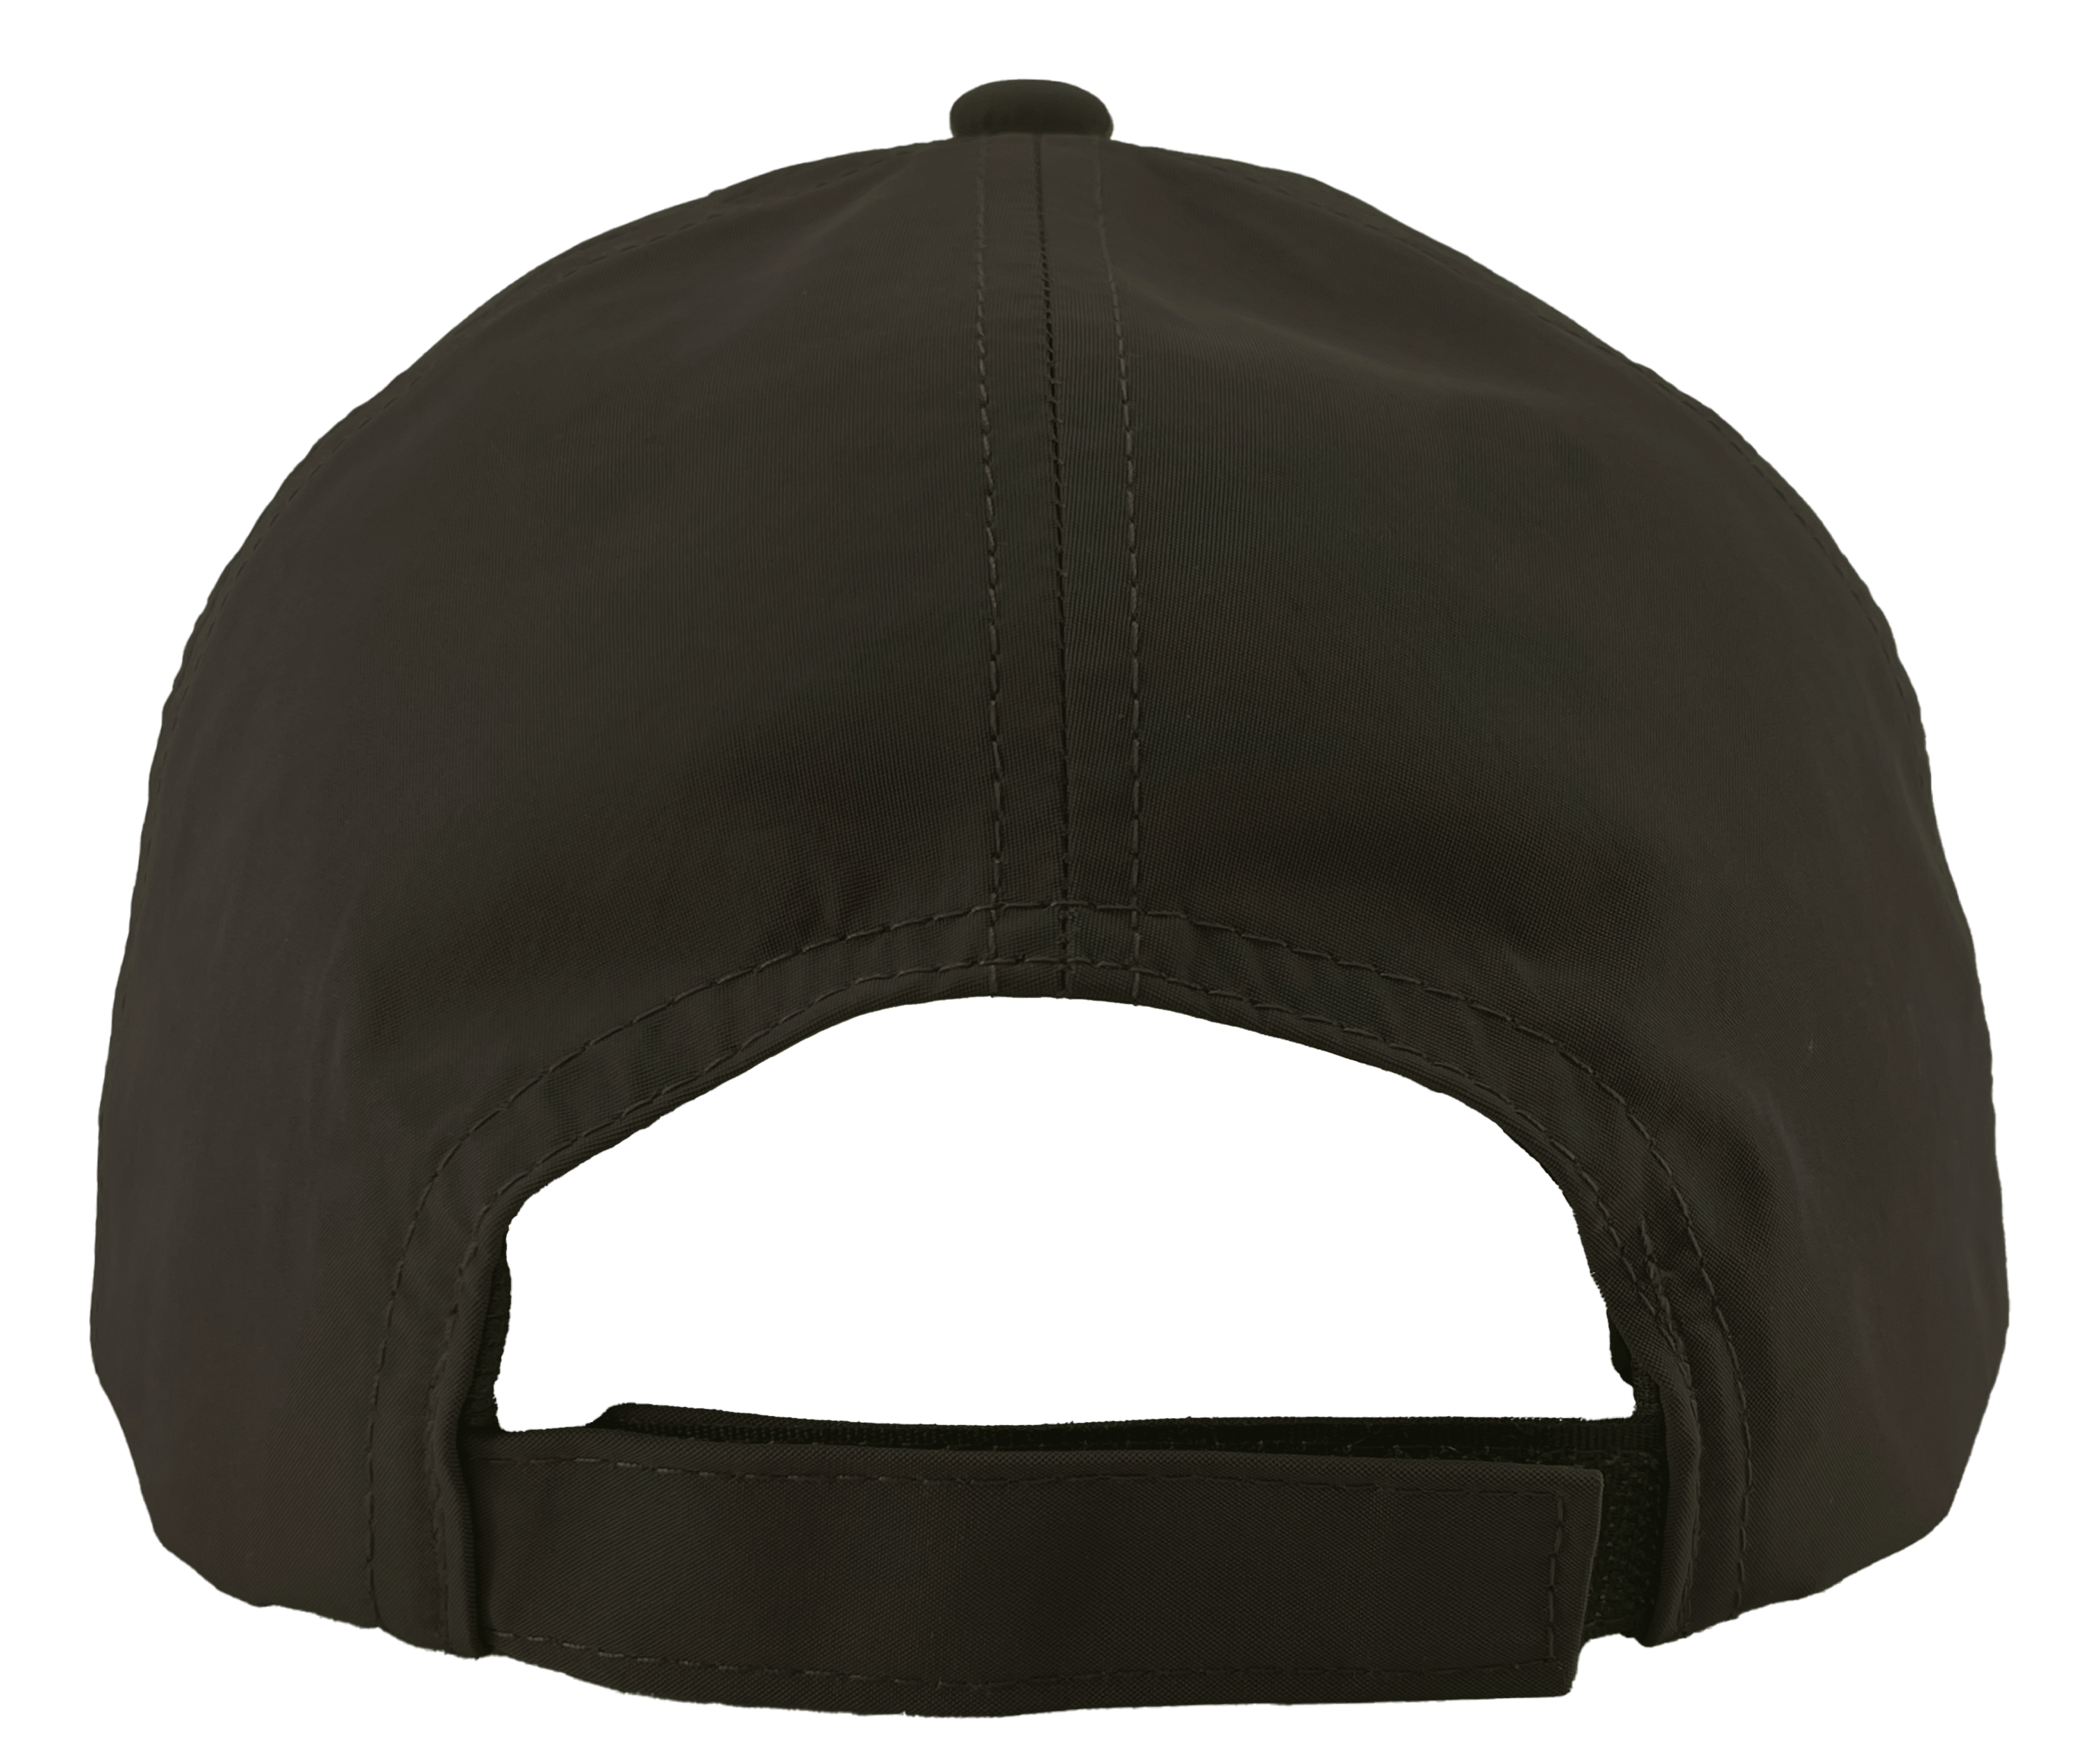 captain unstructured dad hat charcoal